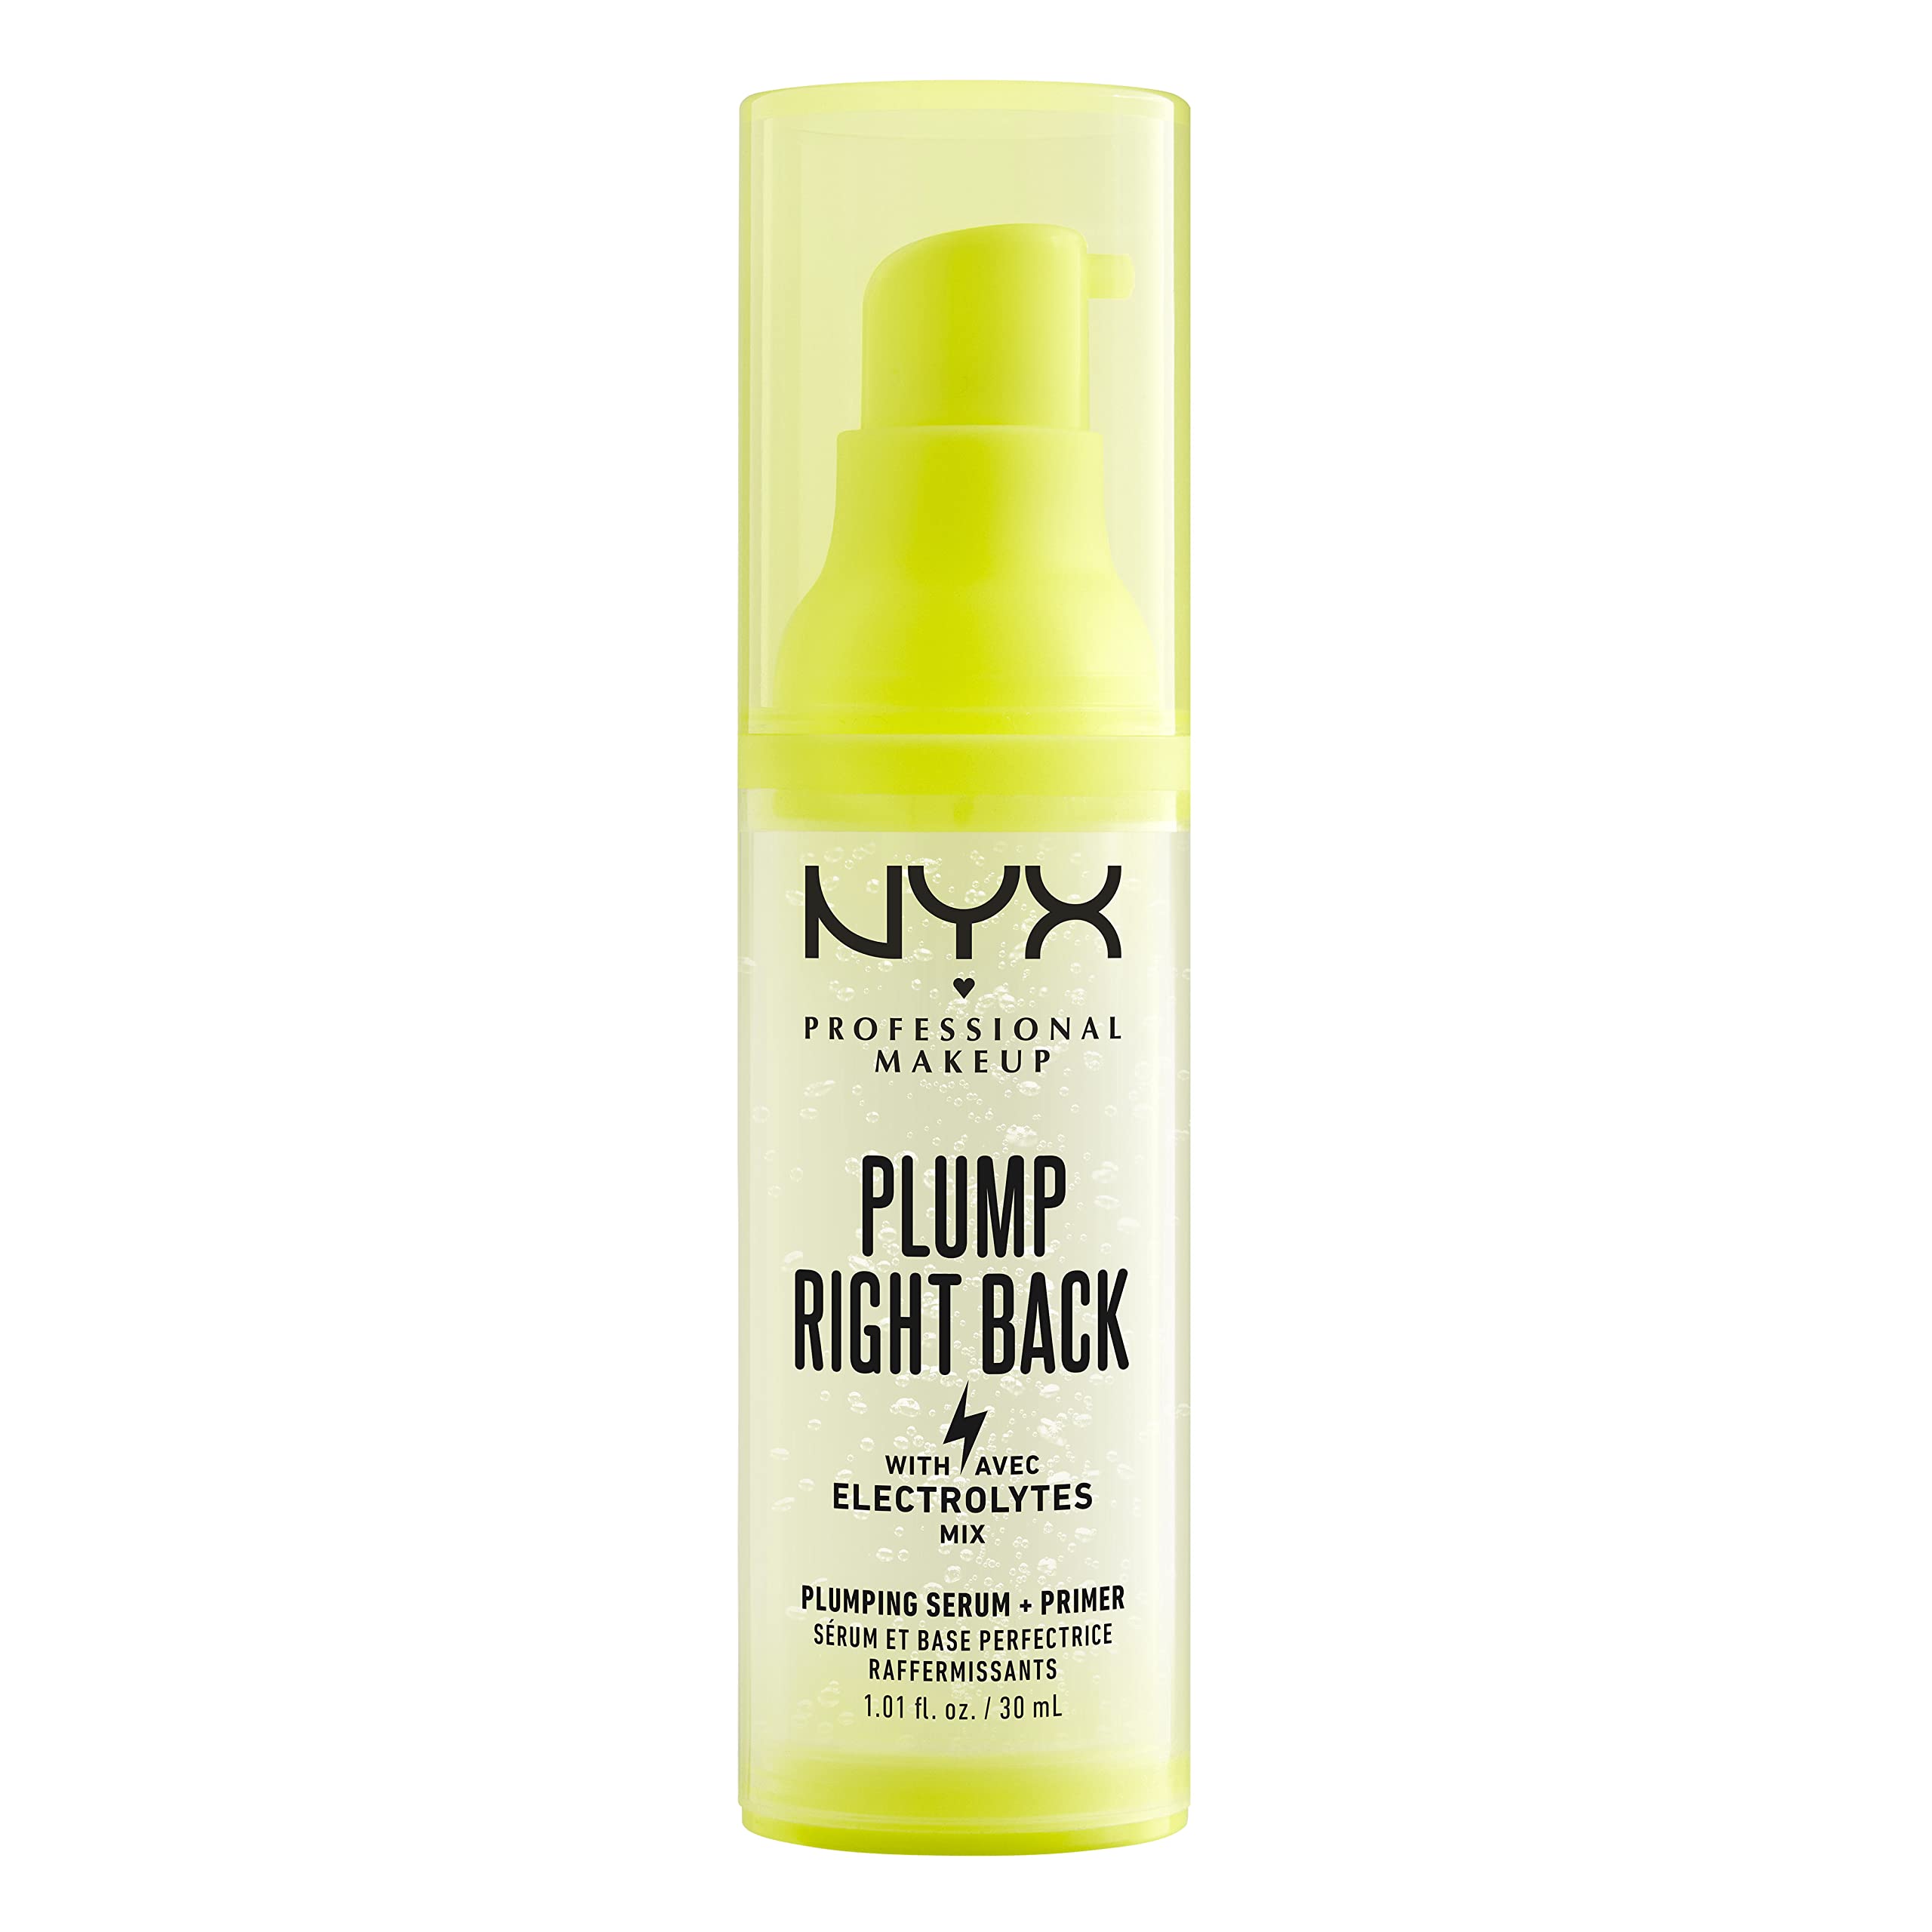 NYX PROFESSIONAL MAKEUP Plump Right Back Plumping Serum & Primer, With 5 Electrolytes